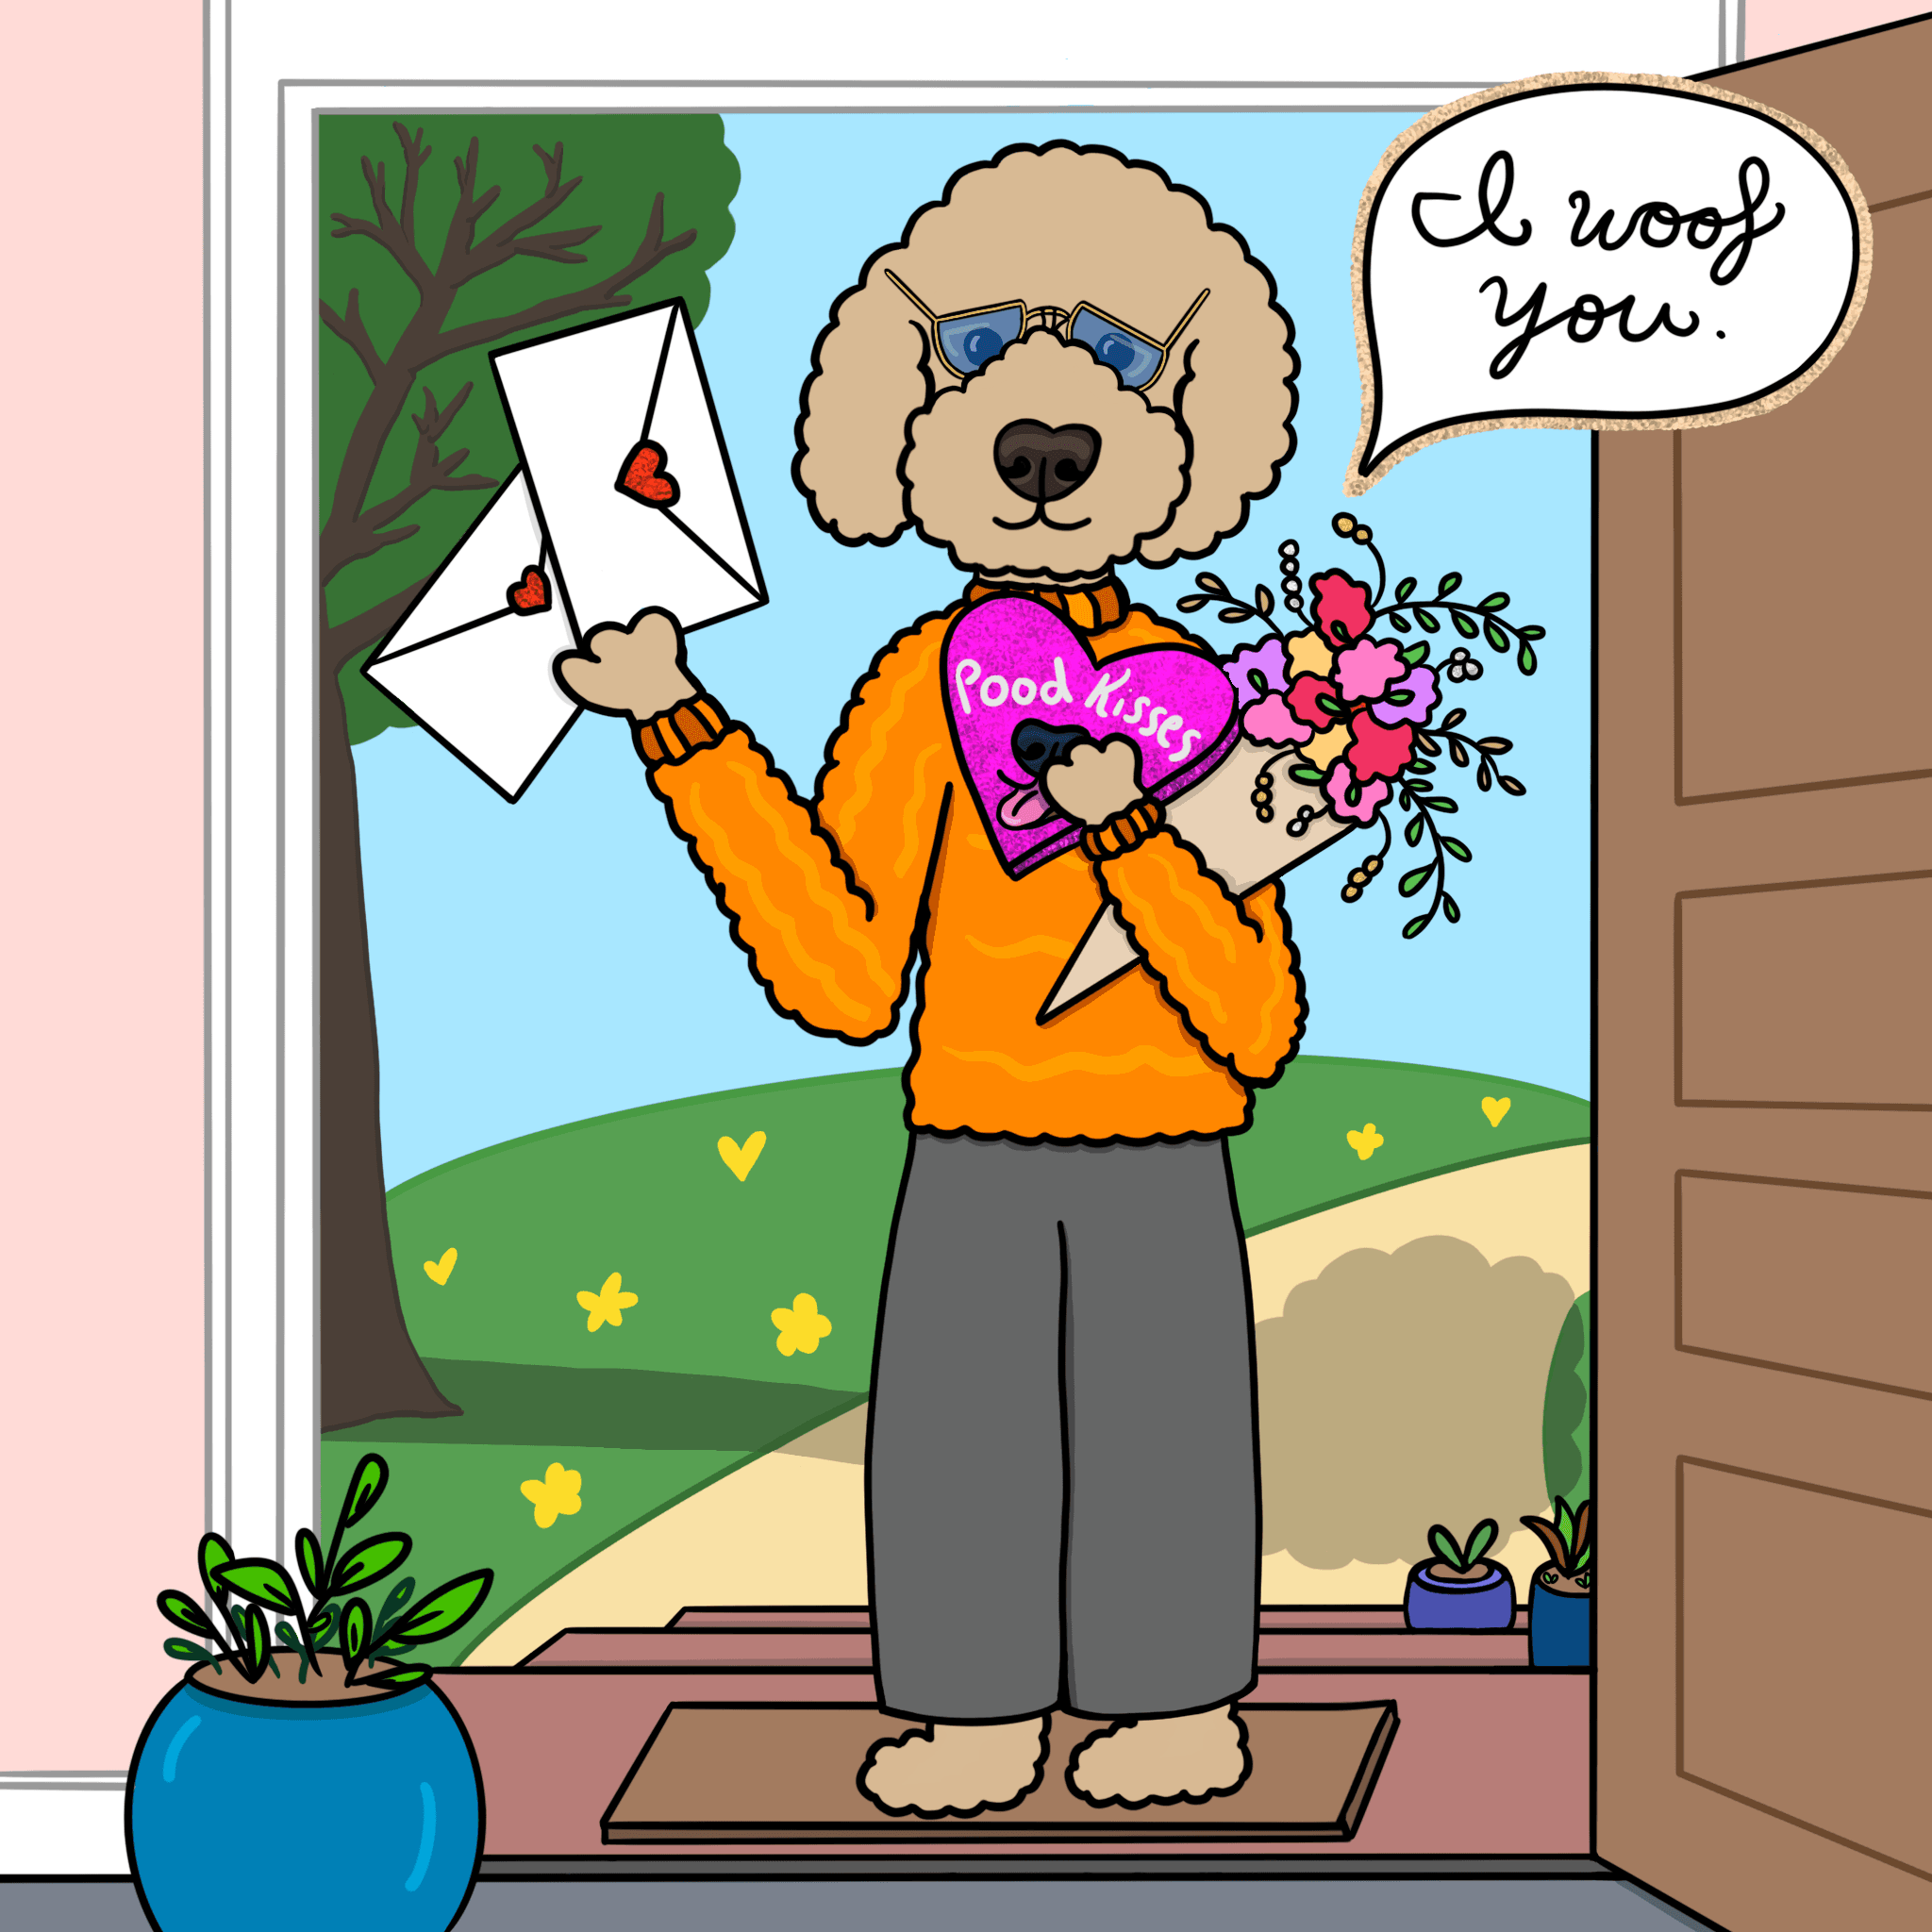 Special Delivery: Flowers and Pood Kisses!